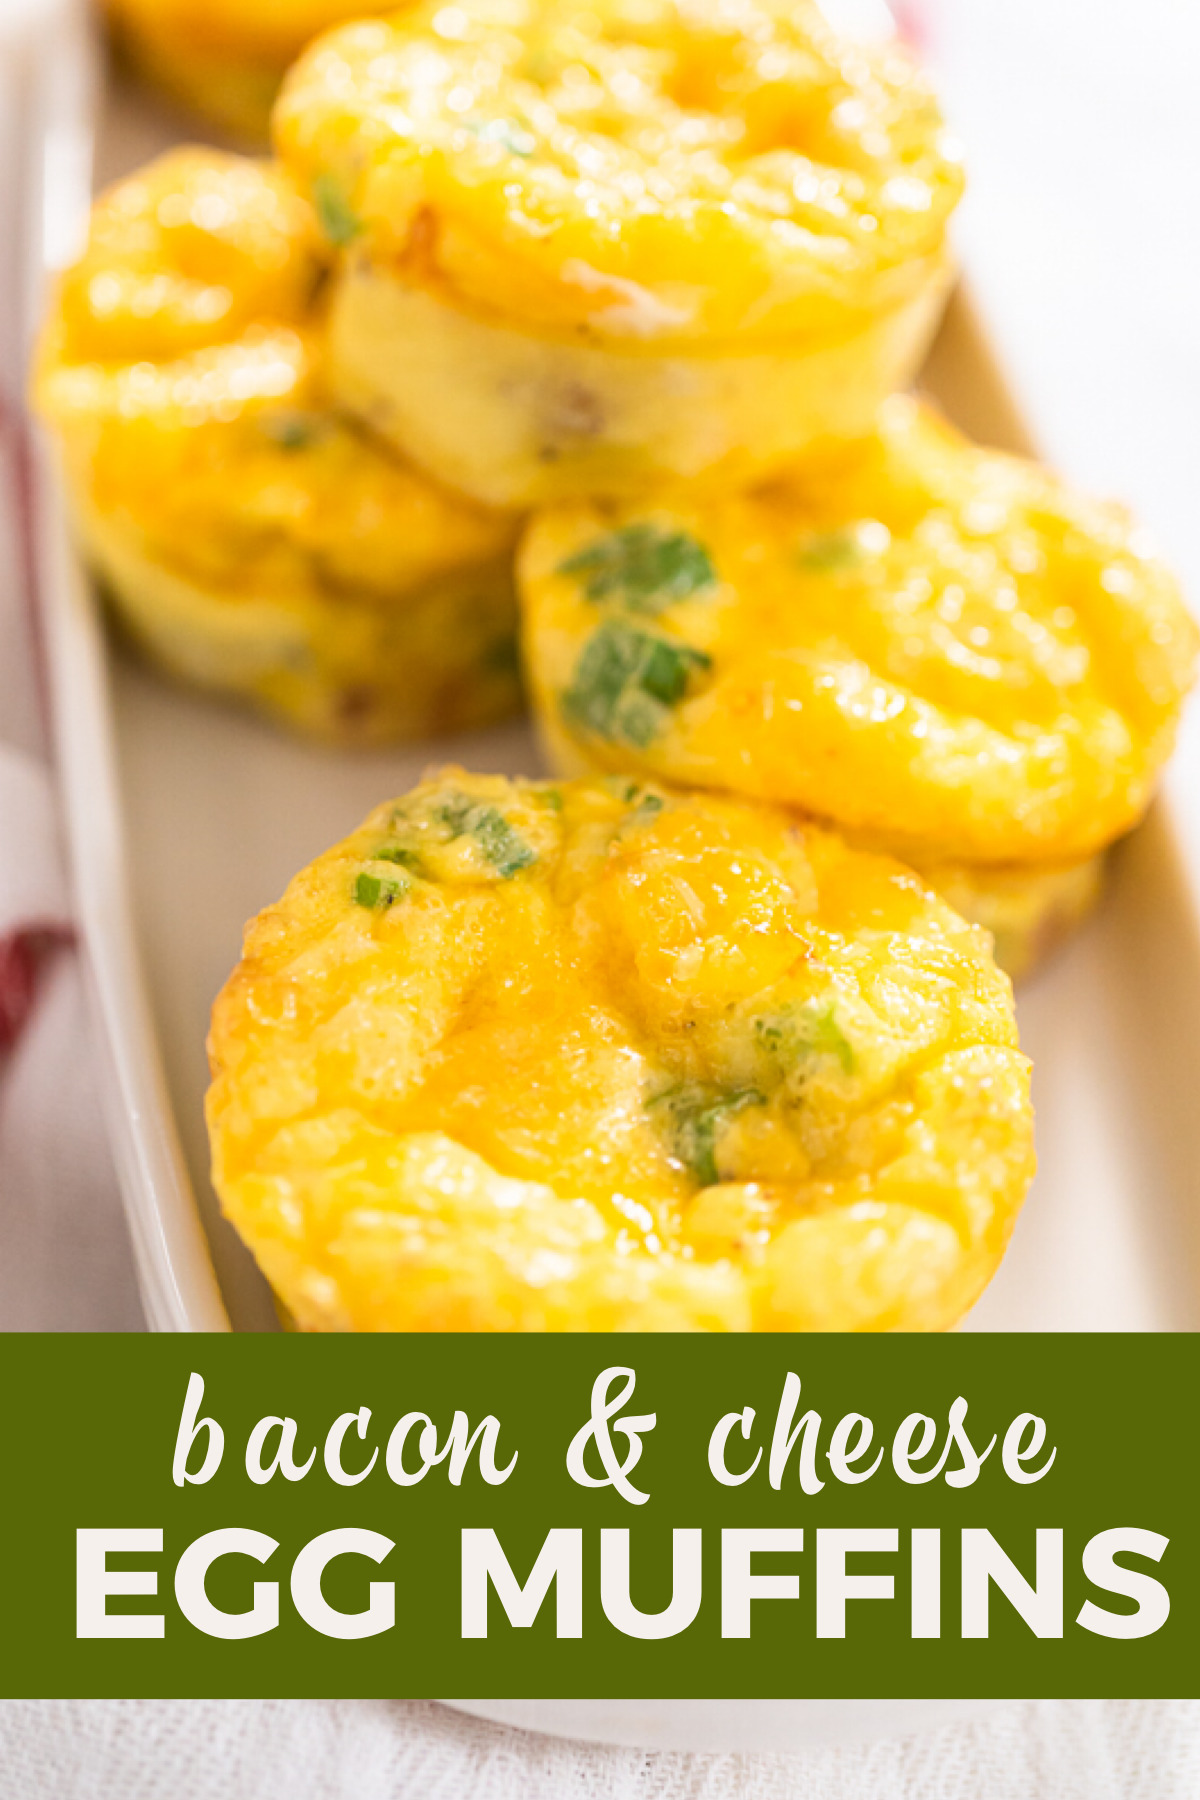 Bacon & cheese egg muffins